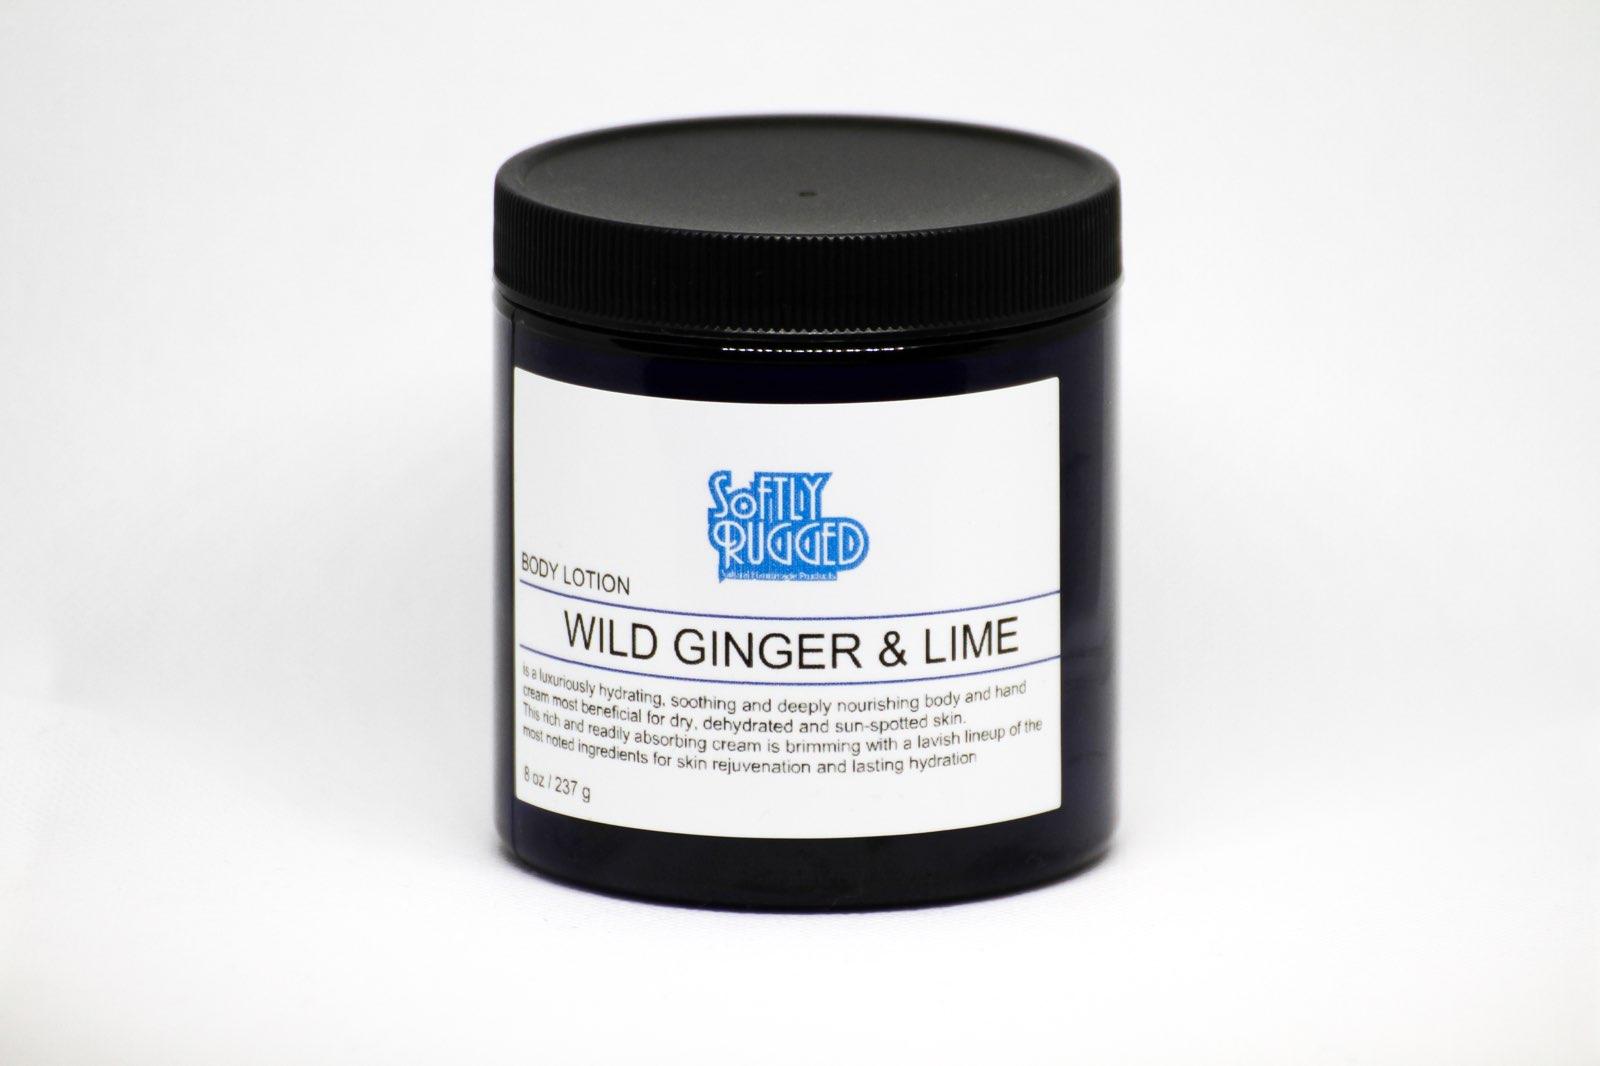 Wild Ginger & Lime - Softly Rugged